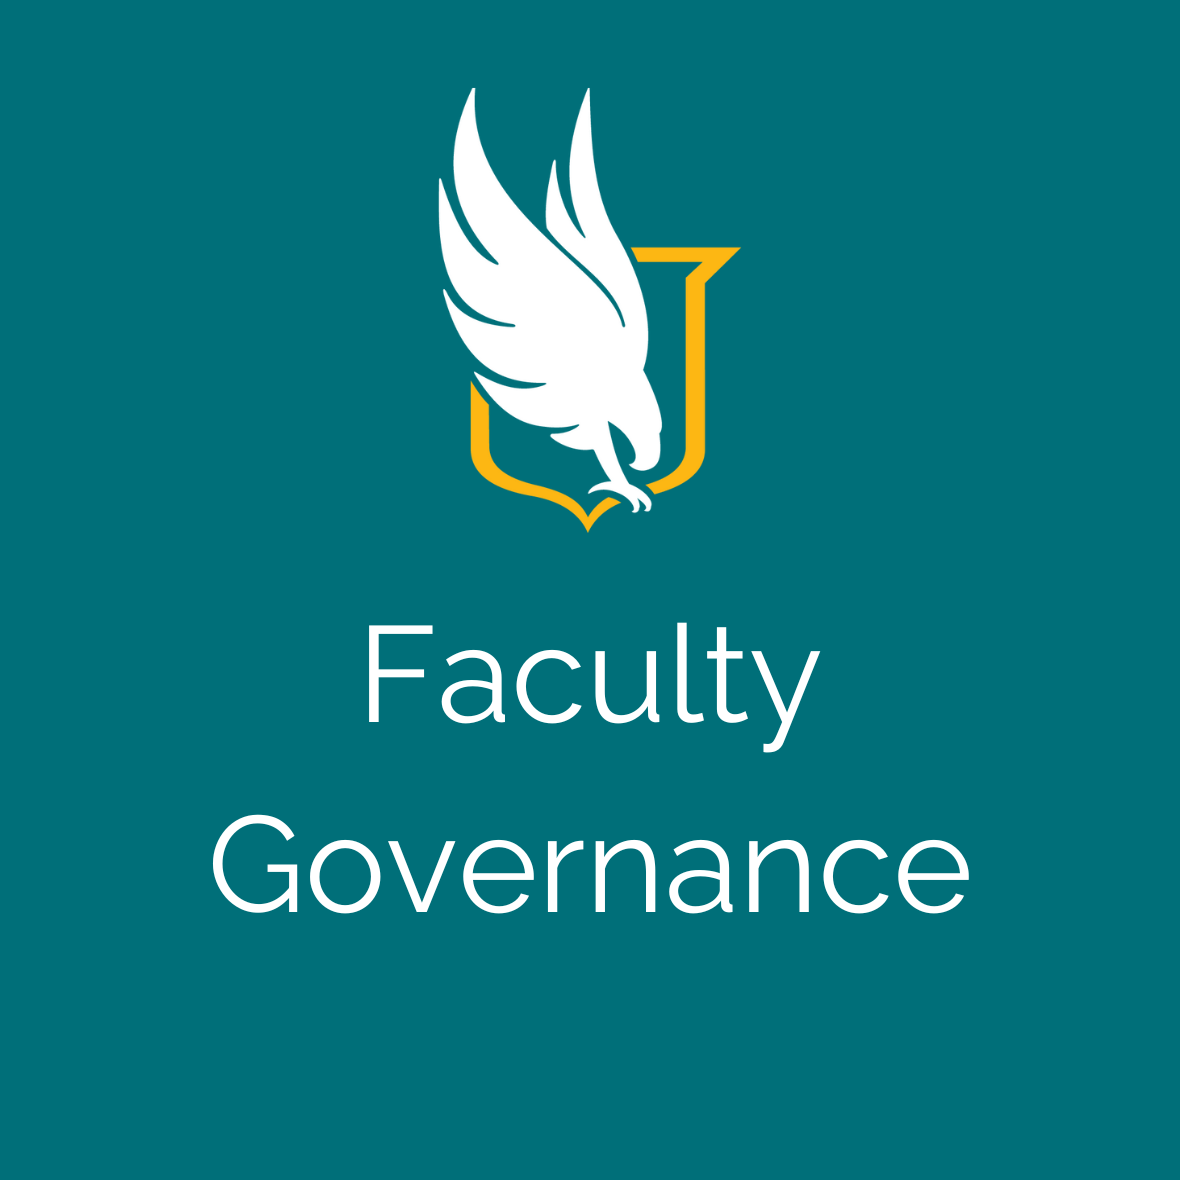 Winthrop Logo and Faculty Governance Text